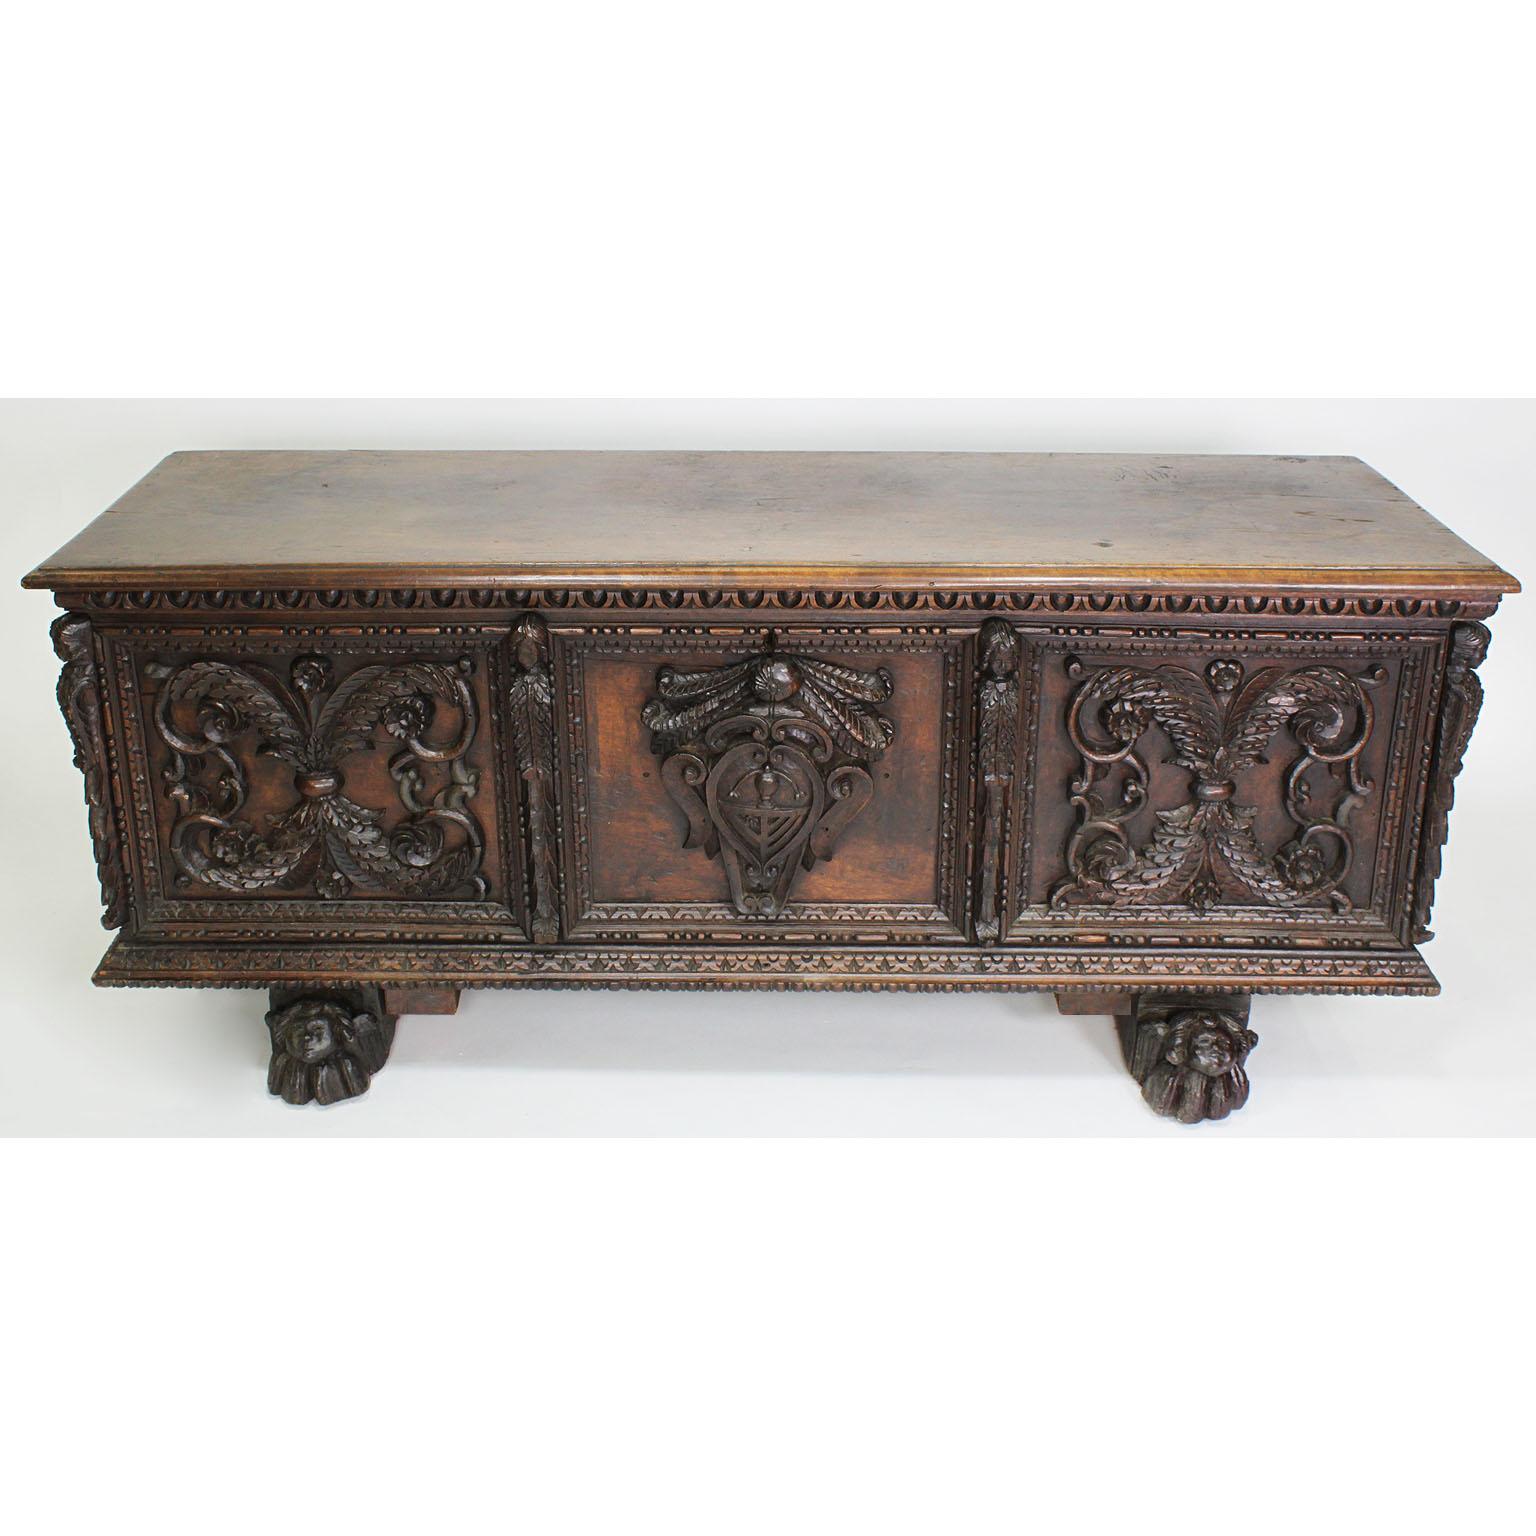 Baroque Revival Italian 19th Century Baroque Style Carved Walnut Figural Cassone Chest-Trunk For Sale